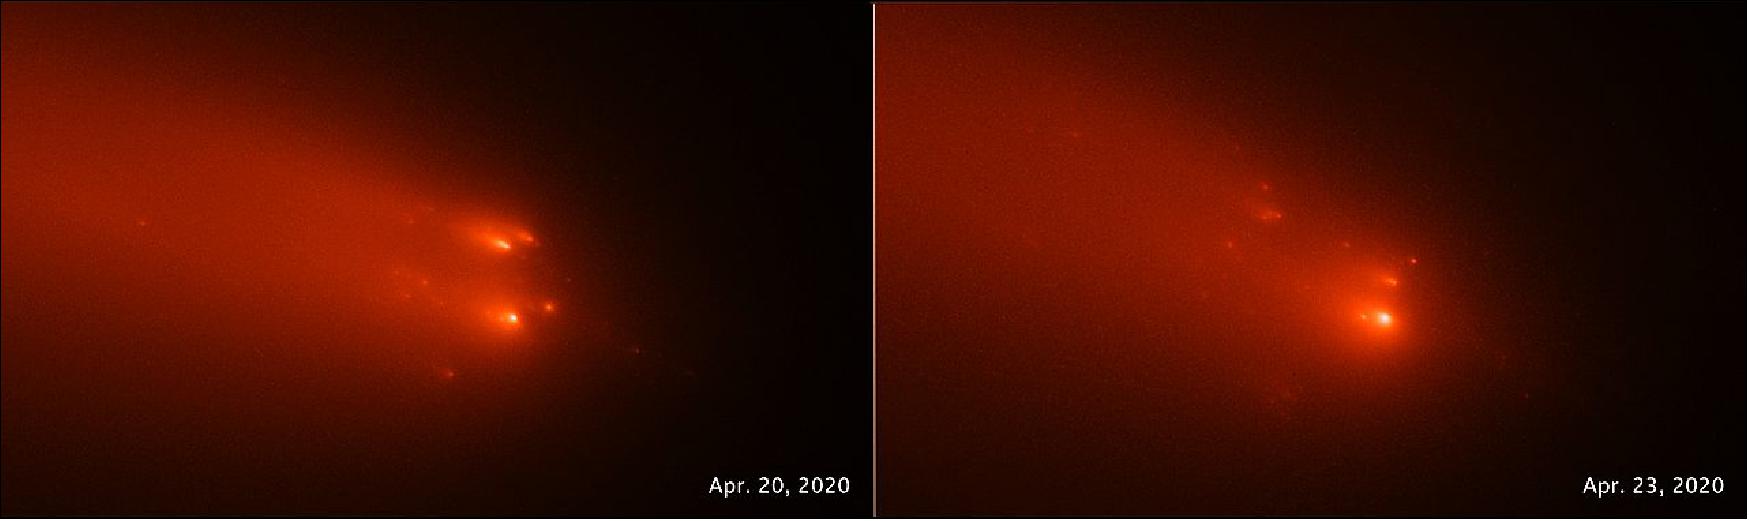 Figure 55: This pair of Hubble Space Telescope images of comet C/2019 Y4 (ATLAS), taken on April 20 and April 23, 2020, reveal the breakup of the solid nucleus of the comet. Hubble photos identify as many as 30 separate fragments. The comet was approximately 91 million miles from Earth when the images were taken. The comet may be a broken off piece of a larger comet that swung by the Sun 5,000 years ago. The comet has been artificially colored in this view to enhance details for analysis (credits: Science: NASA, ESA, Quanzhi Ye (UMD), Image Processing: Alyssa Pagan (STScI)